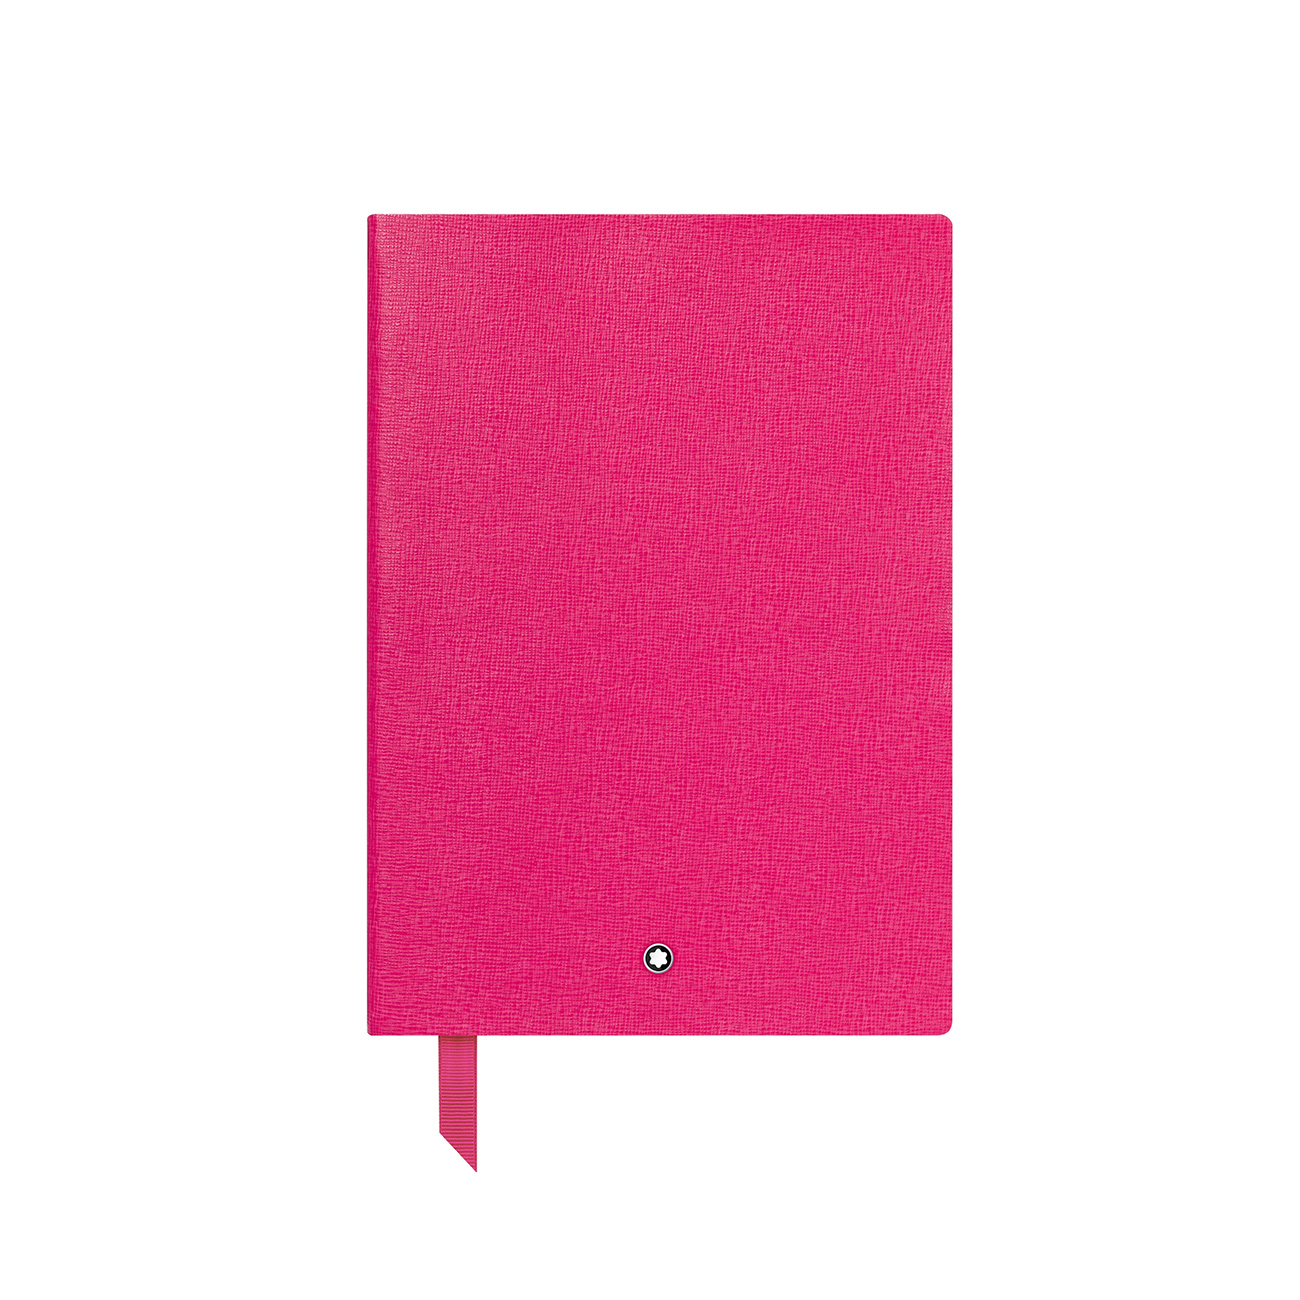 Montblanc Fine Stationery Notebook #146 Pink Lined